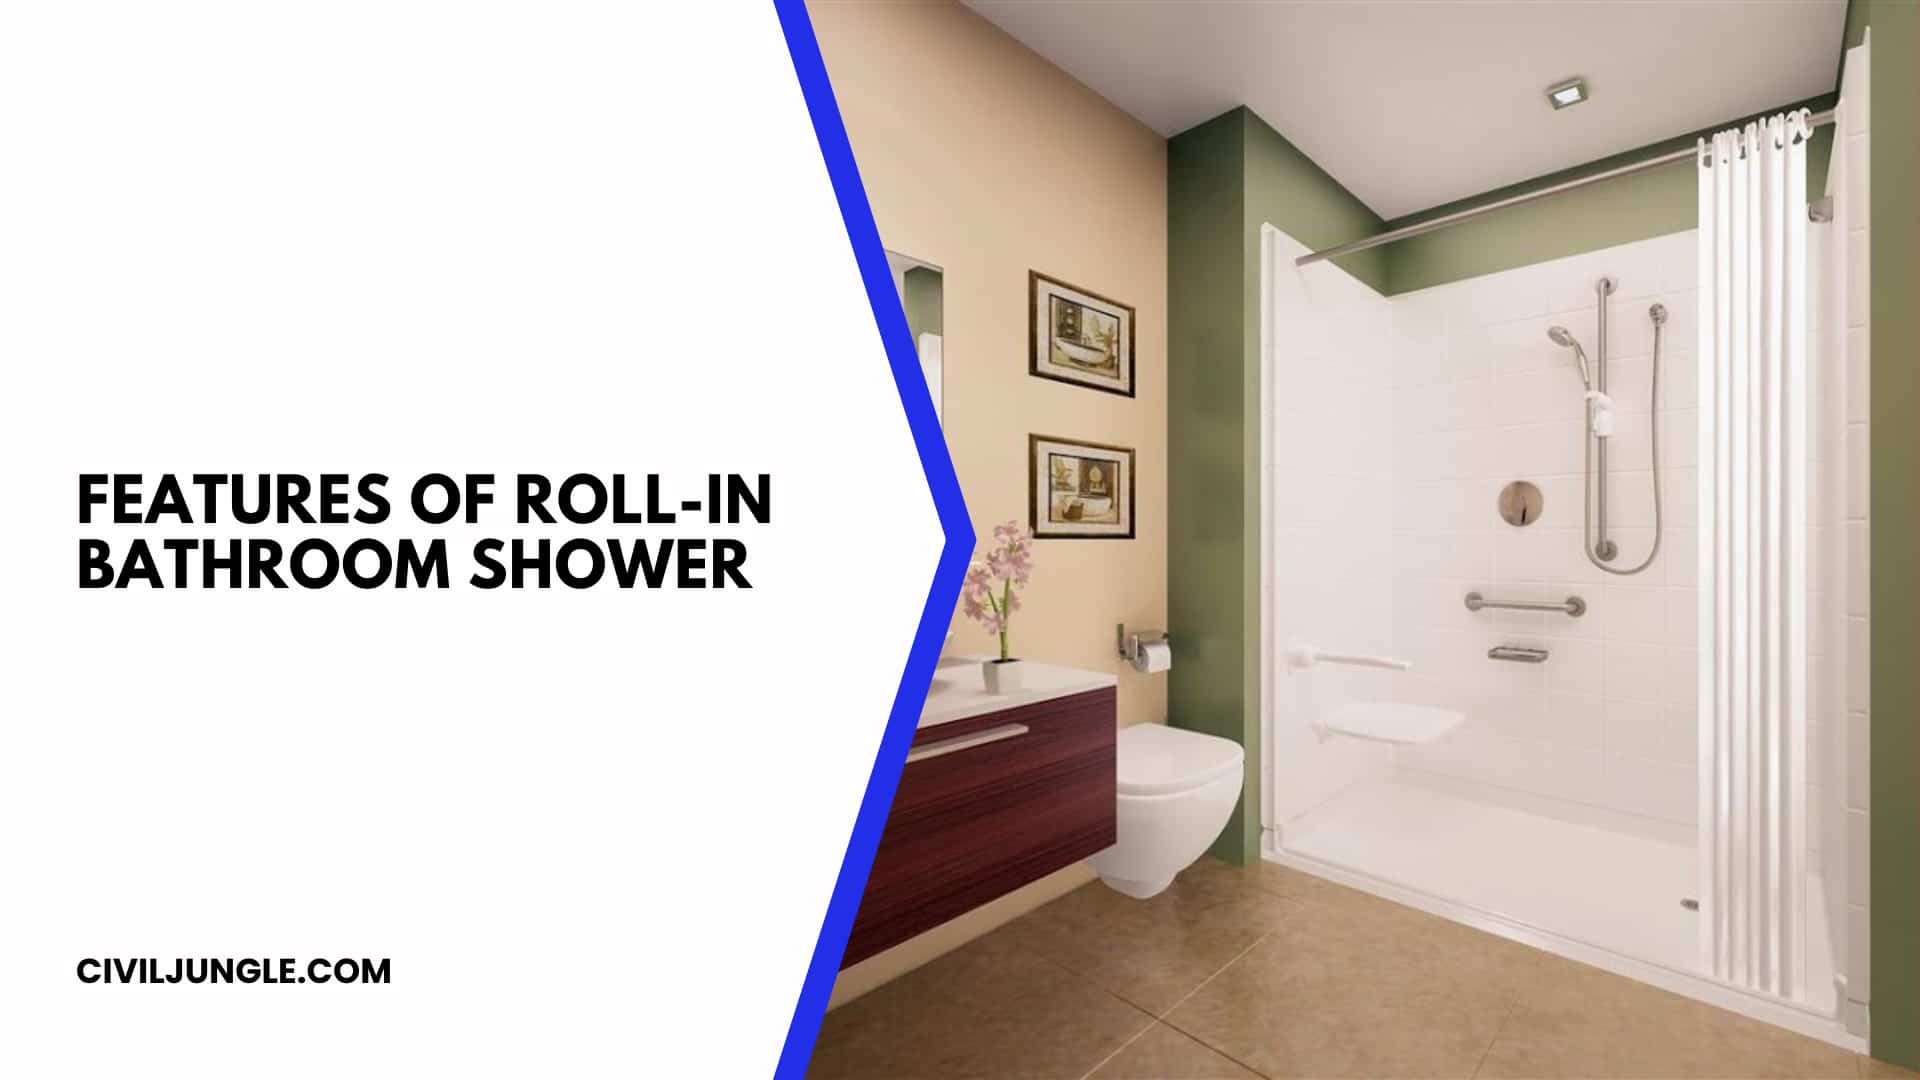 Features of Roll-in Bathroom Shower